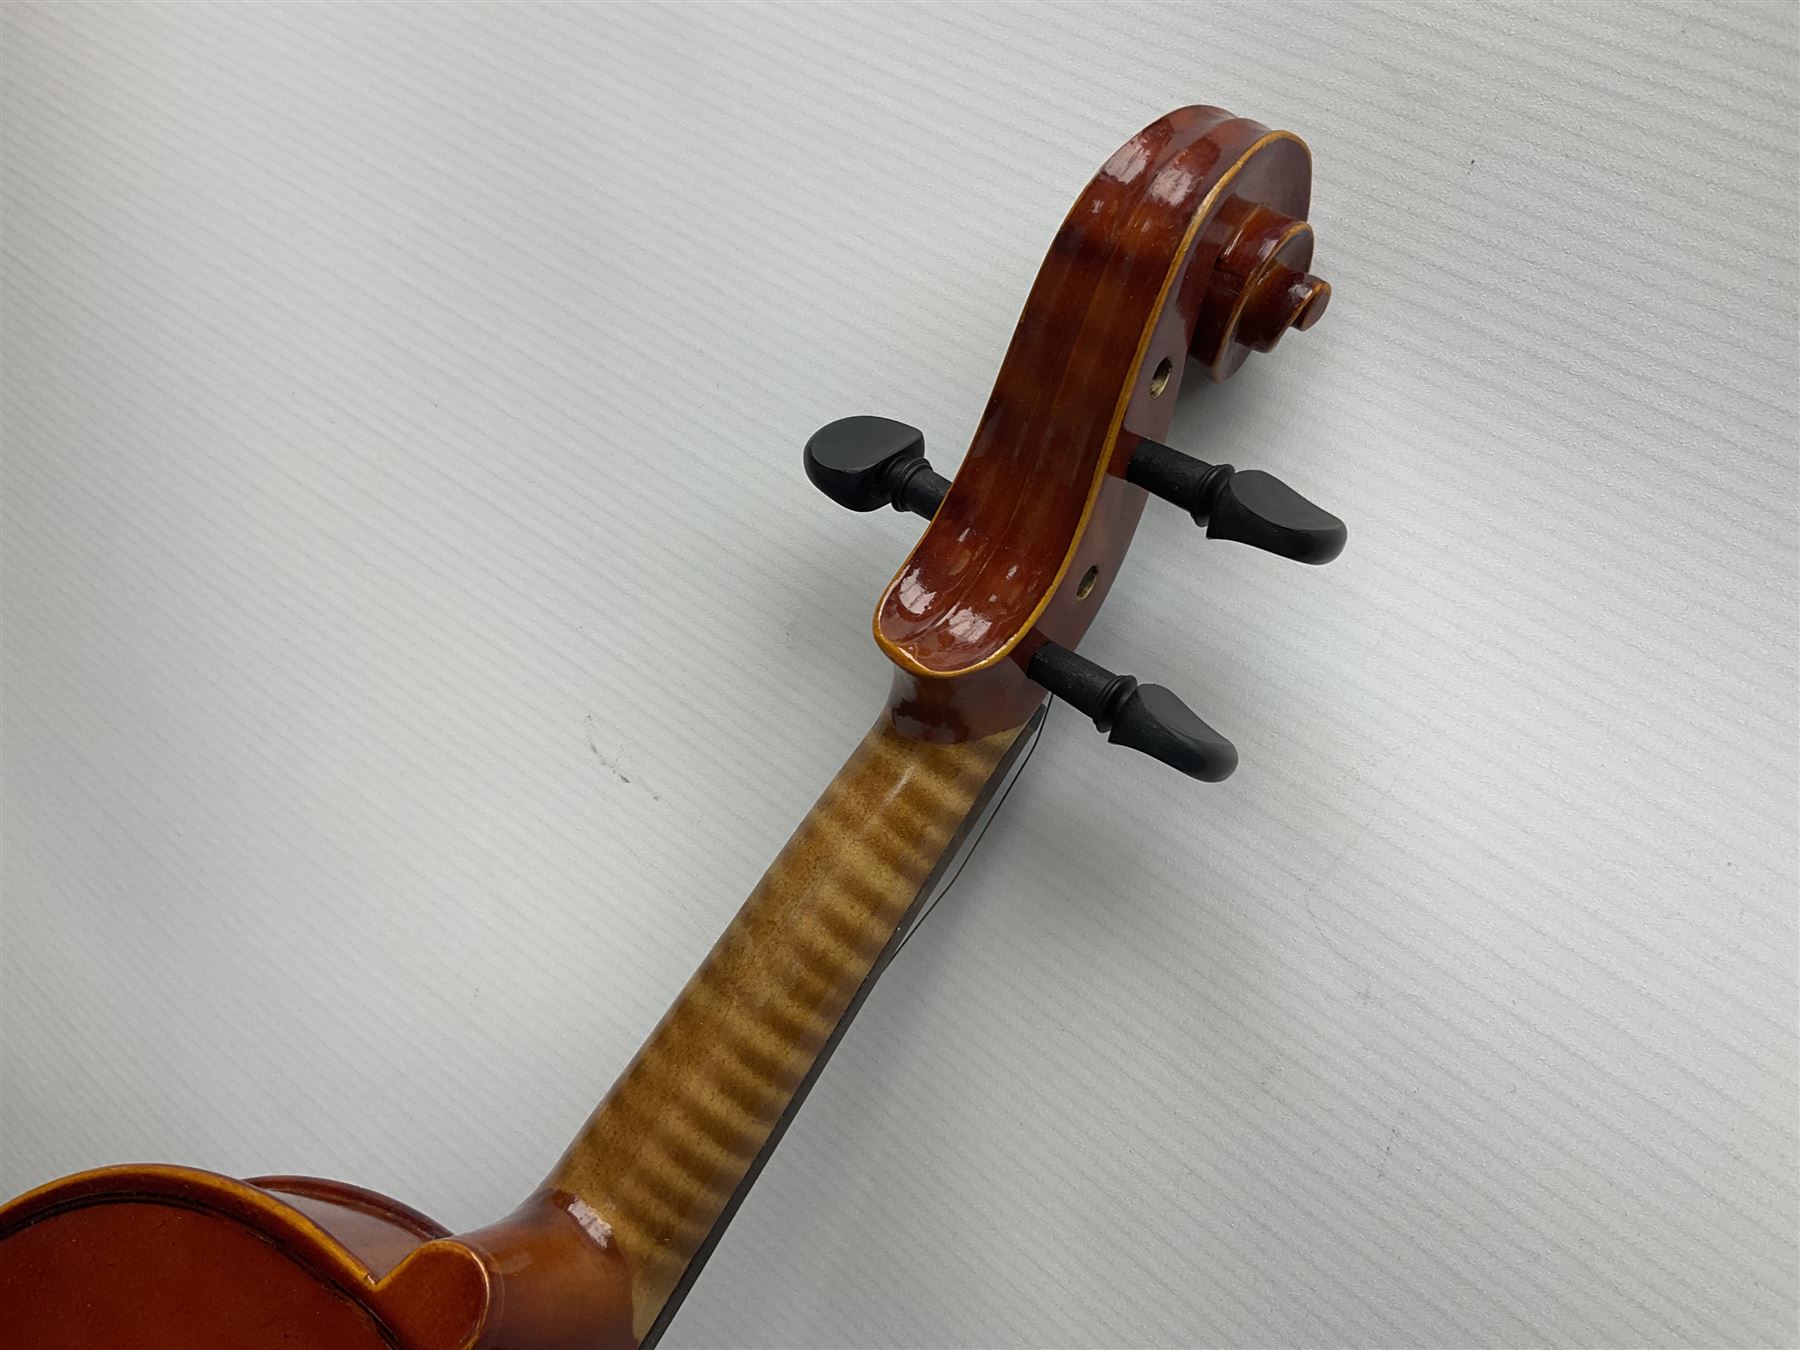 Late 19th century French violin for restoration and completion with 36cm two-piece maple back and ri - Image 5 of 19